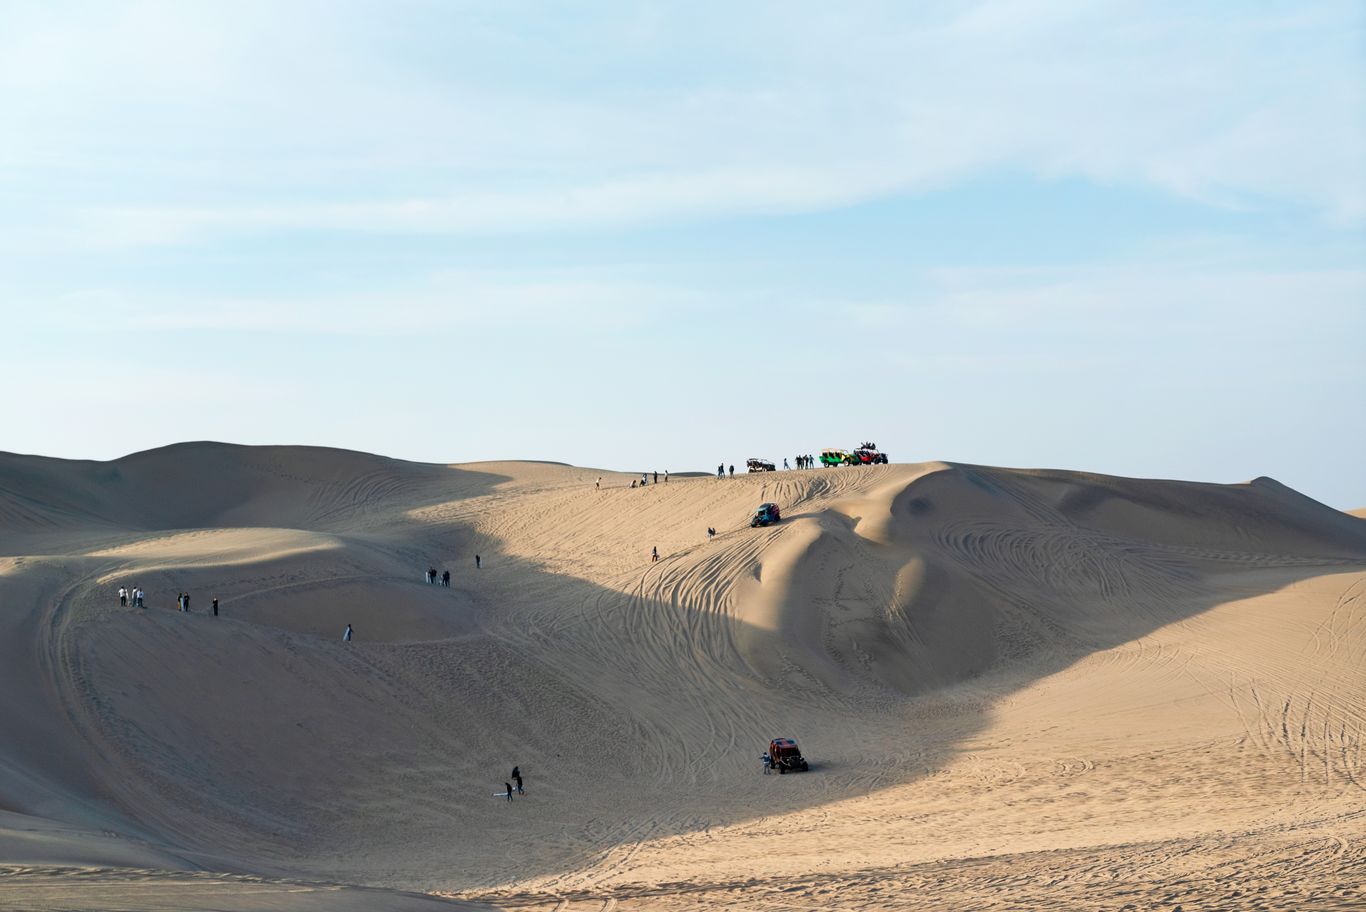 City tour, buggies / sandboarding in private transport from huacachina